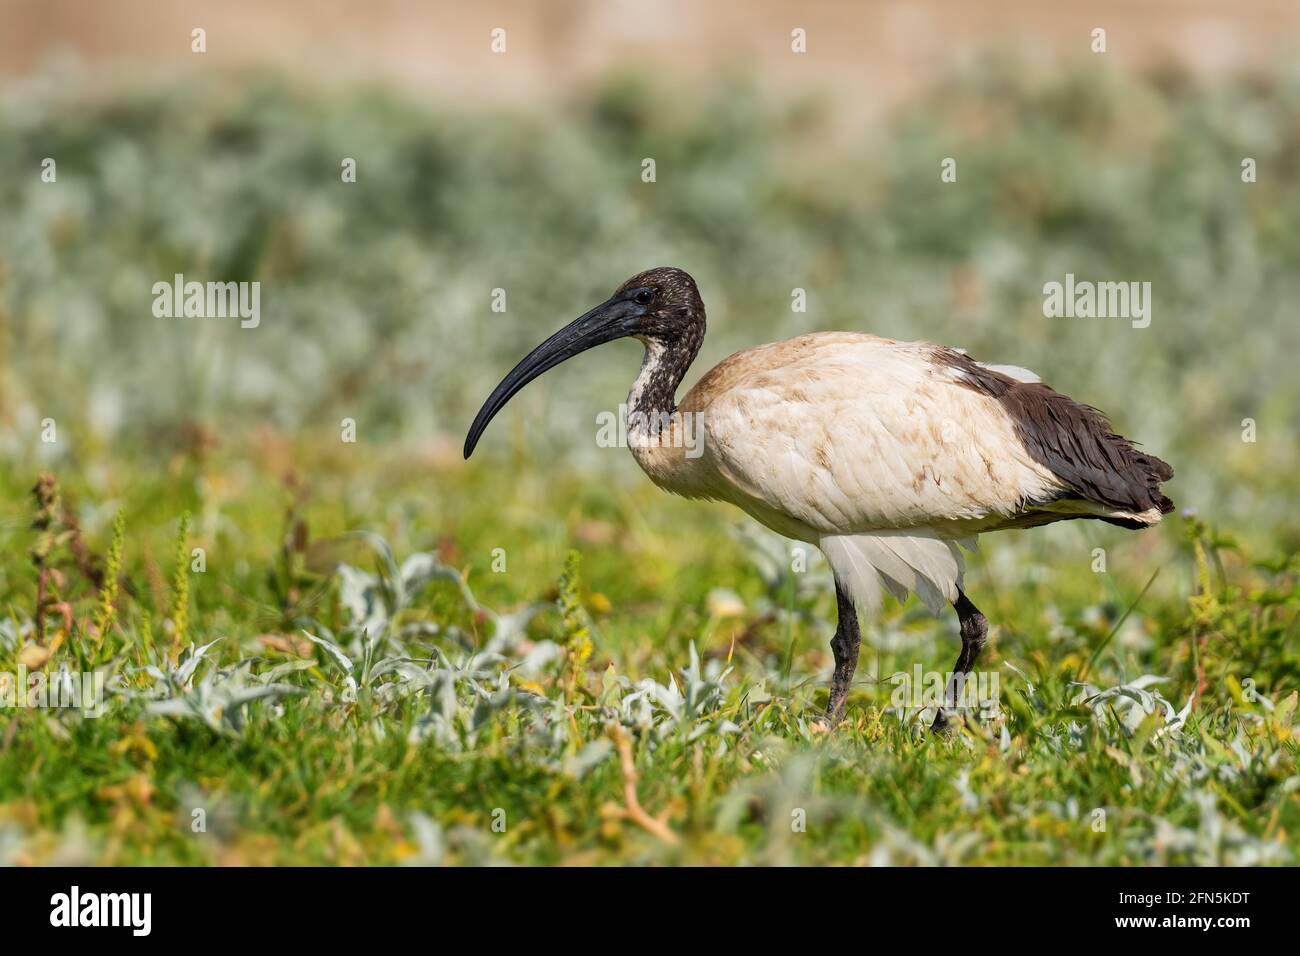 Sacred Ibis - Threskiornis aethiopicus, beautiful black and white ibis from African fields and meadows, lake Ziway, Ethiopia. Stock Photo